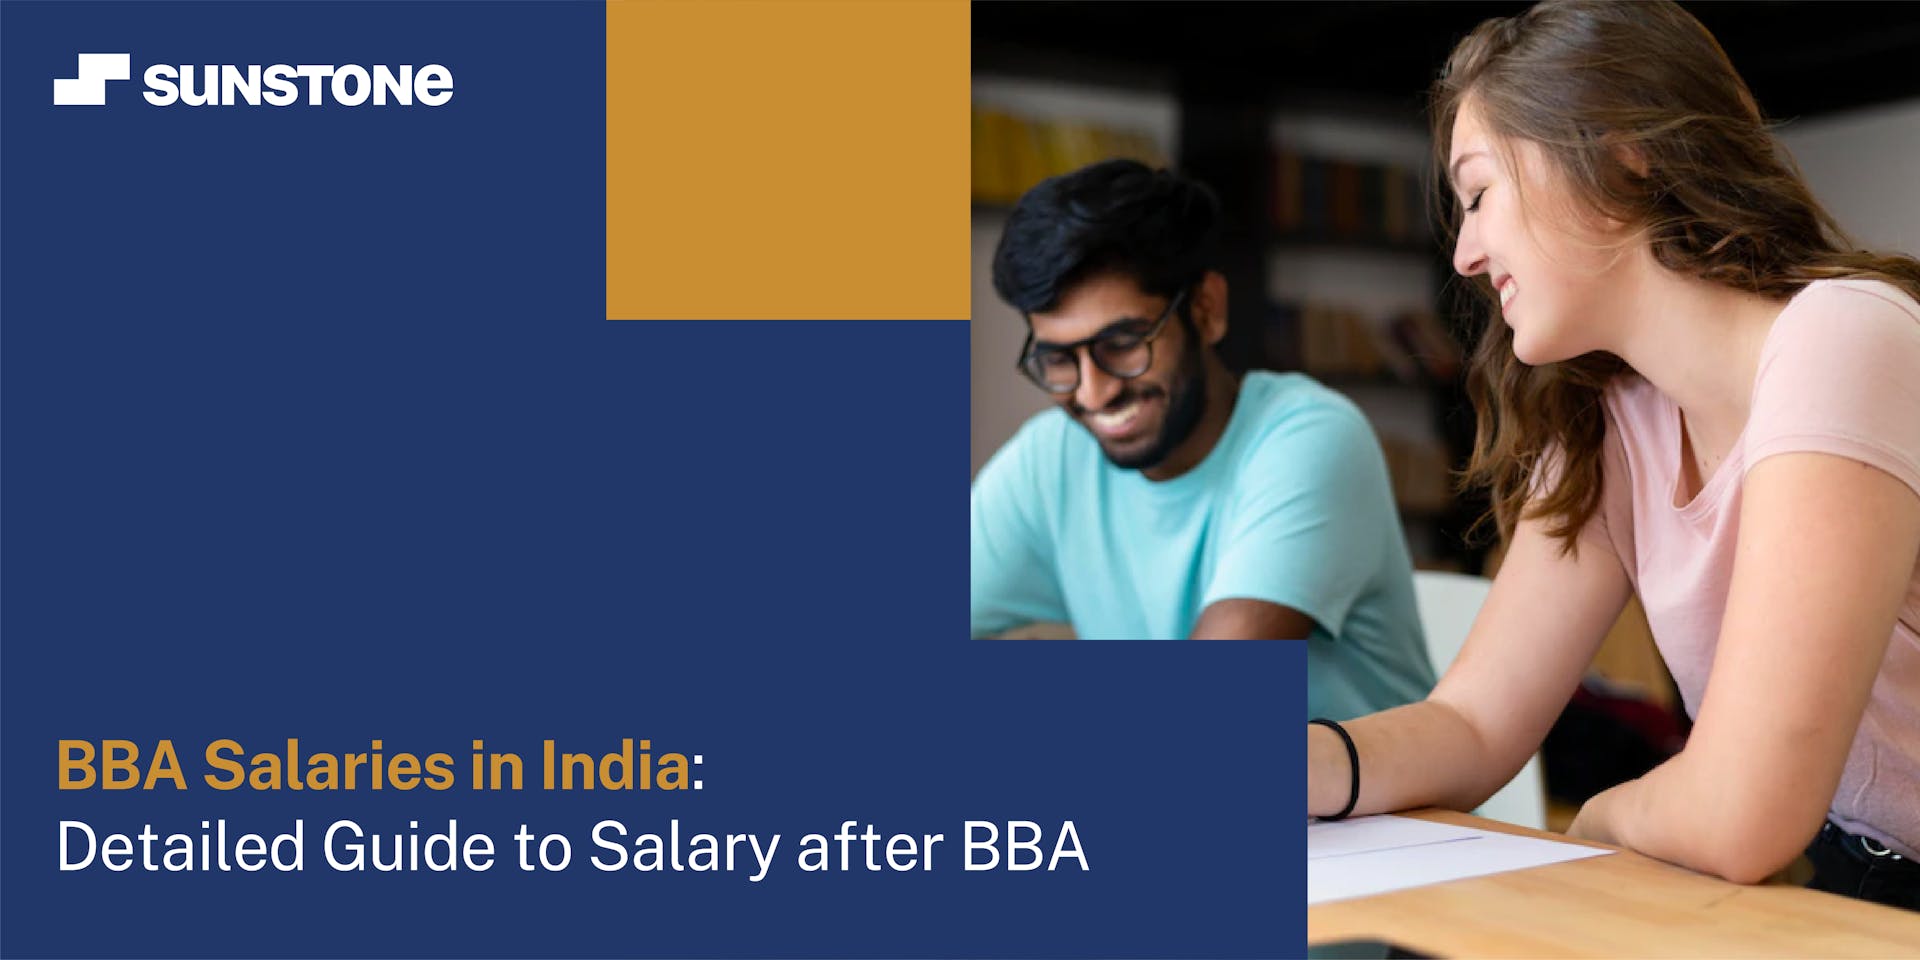 BBA Salaries in India: Detailed Guide to Salary after BBA